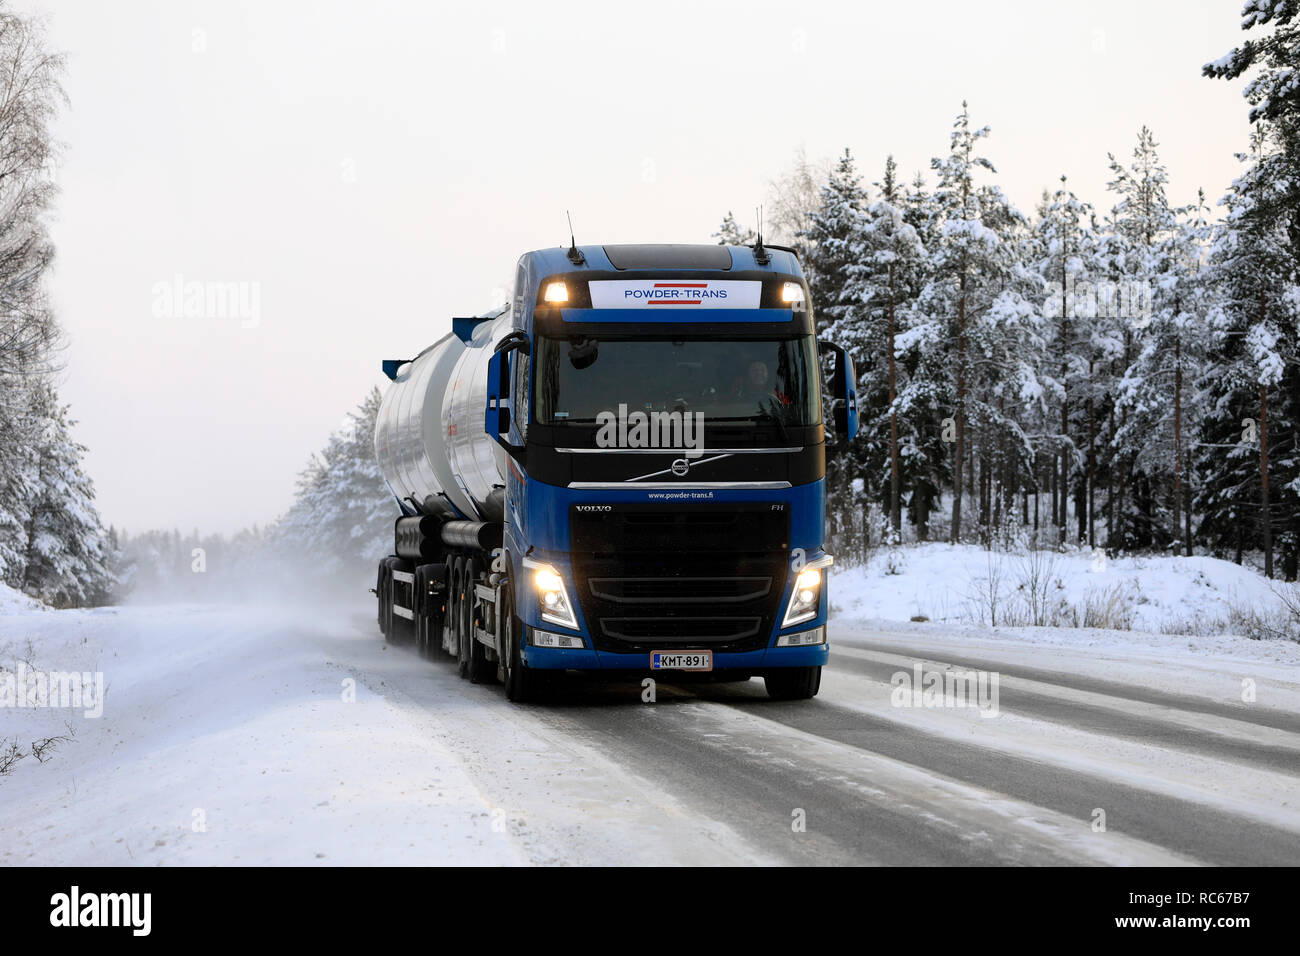 Salo, Finland - December 23, 2018: Volvo FH bulk transport truck up front driving on snowy road in arctic conditions, with high beam lights on briefly Stock Photo